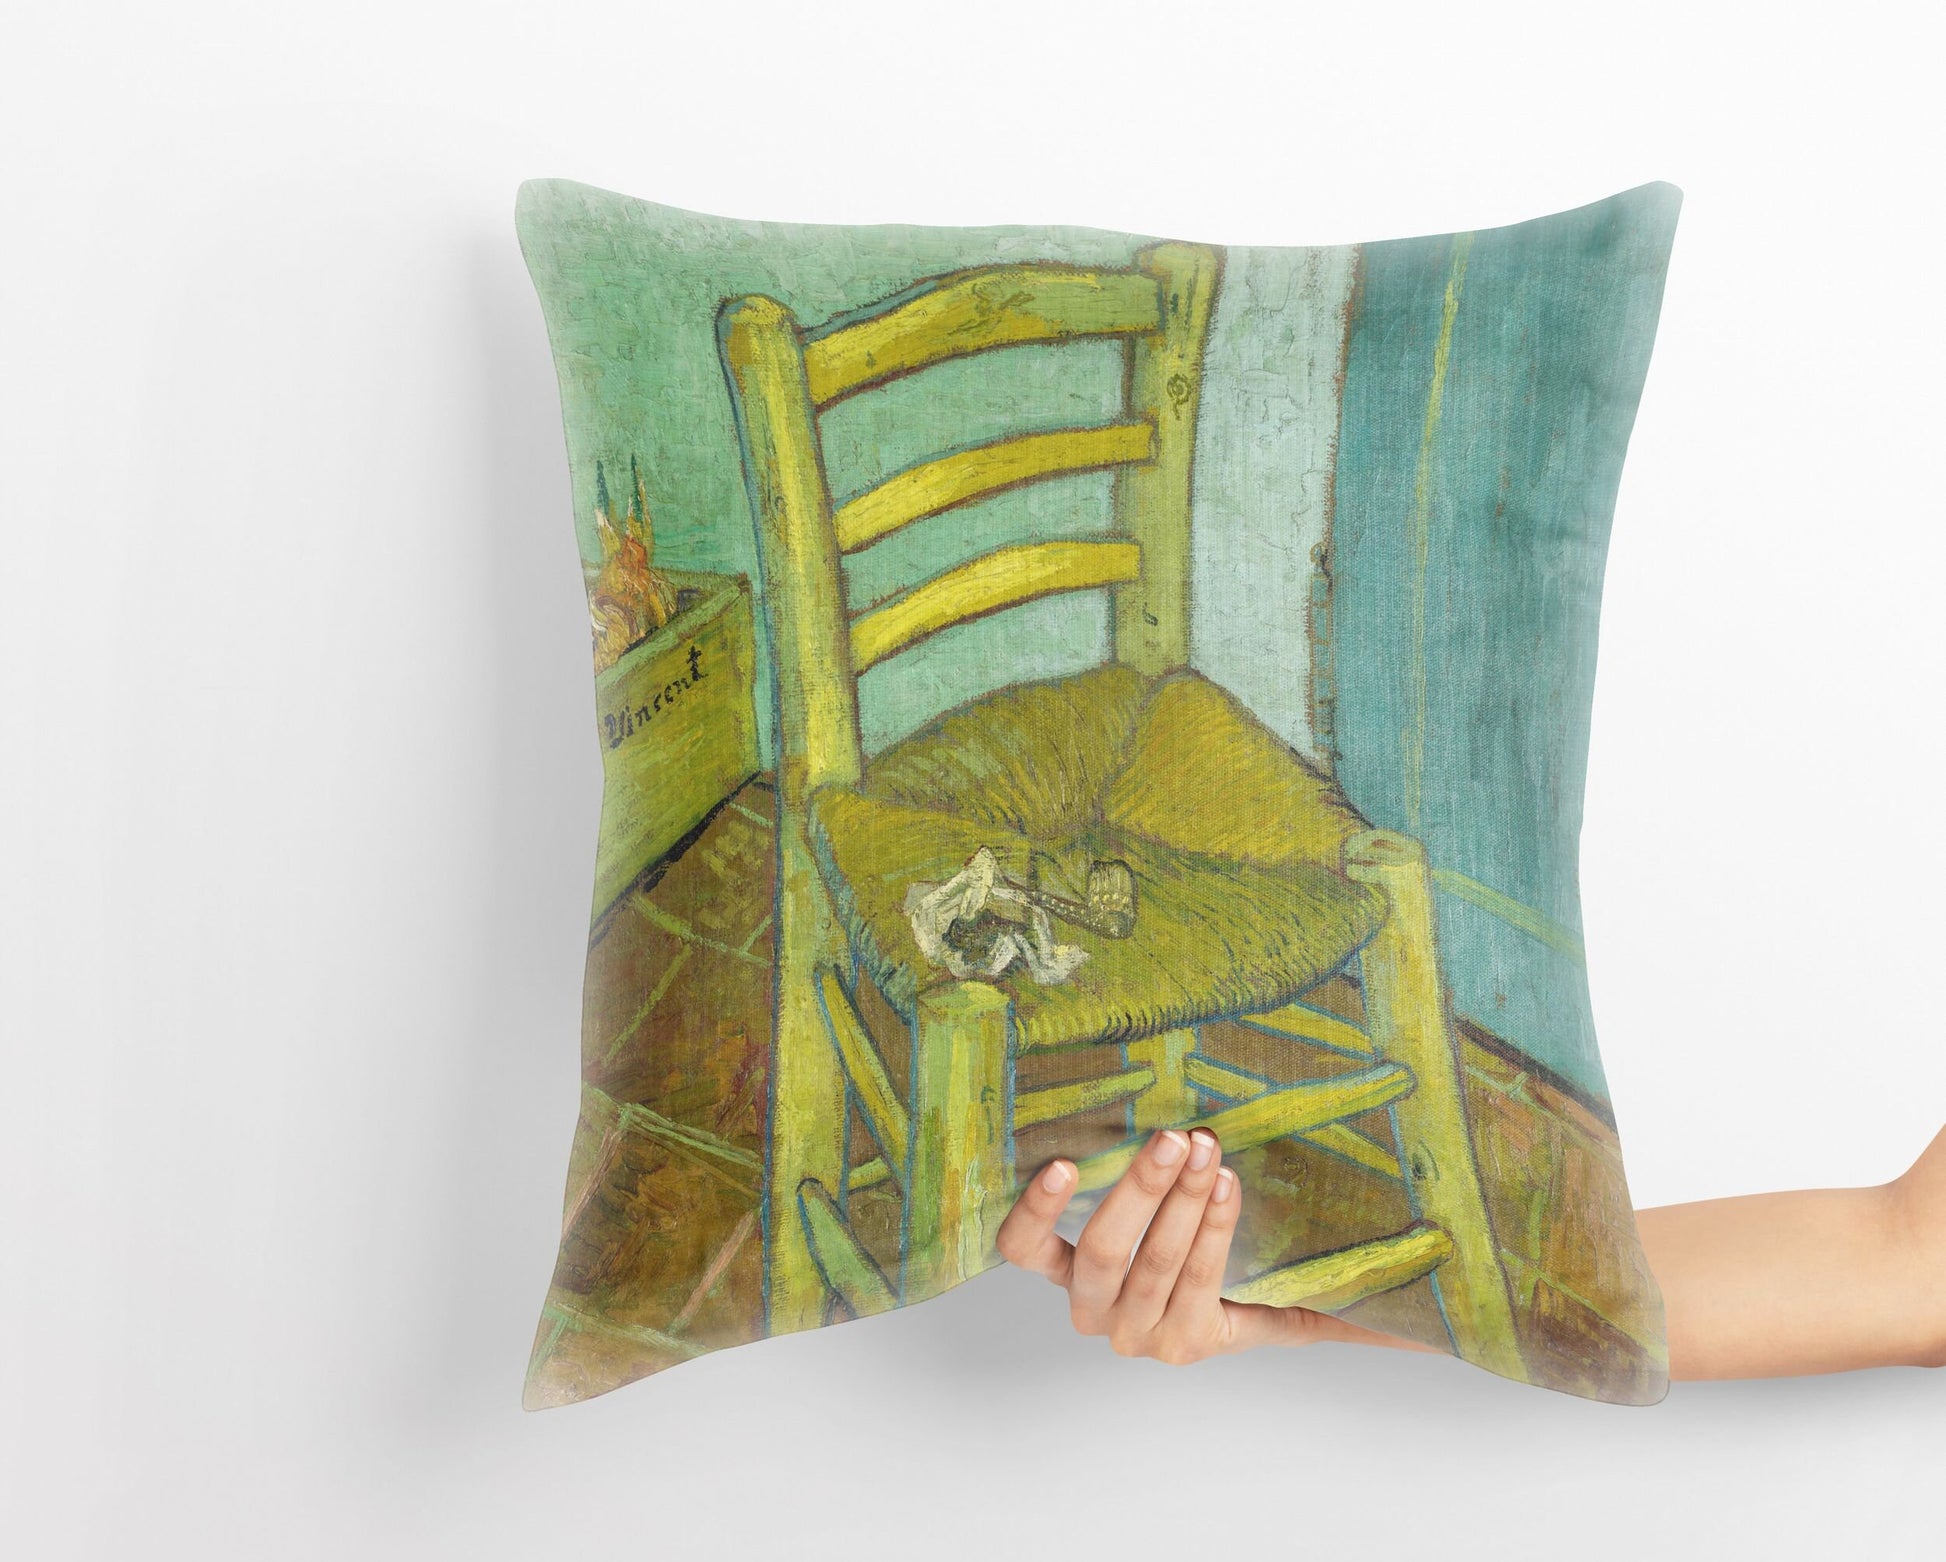 Vincent Van Gogh Famous Art Emty Chair 1888, Throw Pillow Cover, Abstract Throw Pillow, Post-Impressionist Pillow, 22X22 Pillow Cover